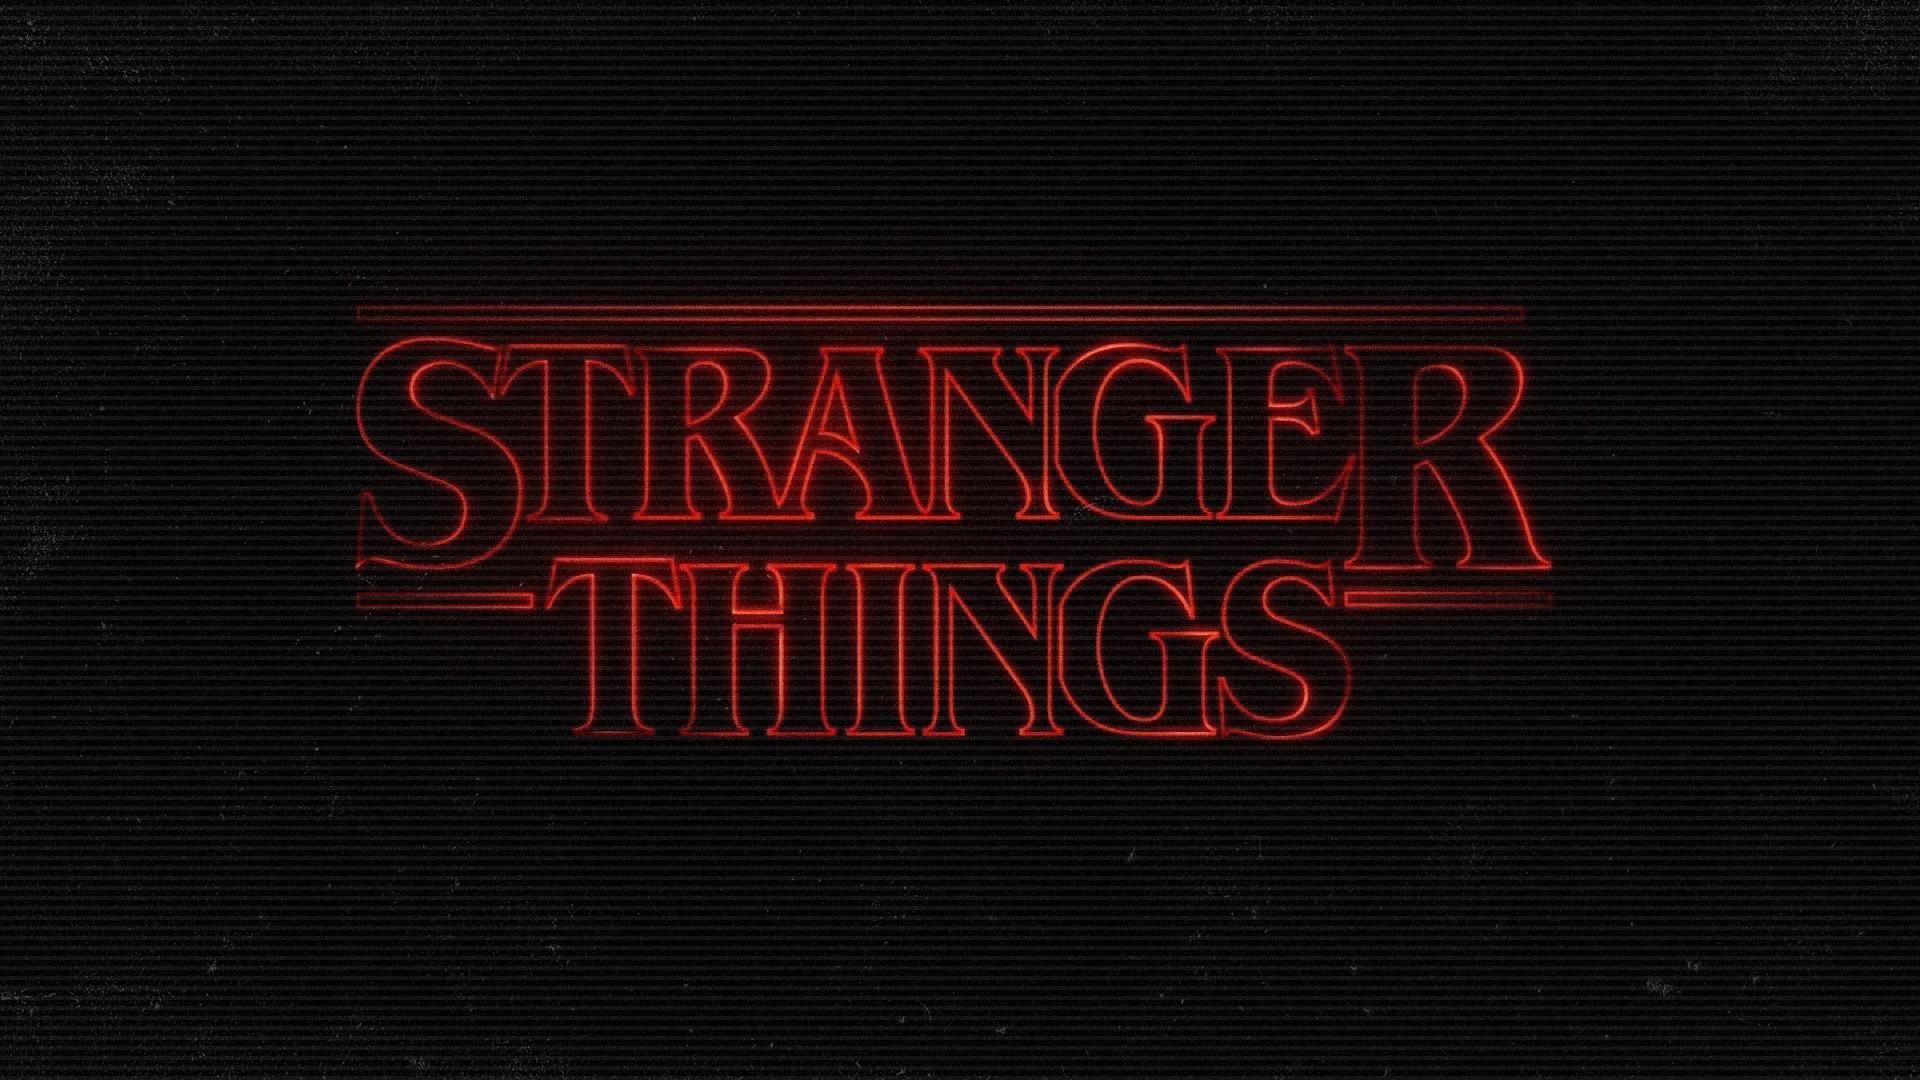 Stranger things backrounds I didnt make these 8 wallpapers  Fandom